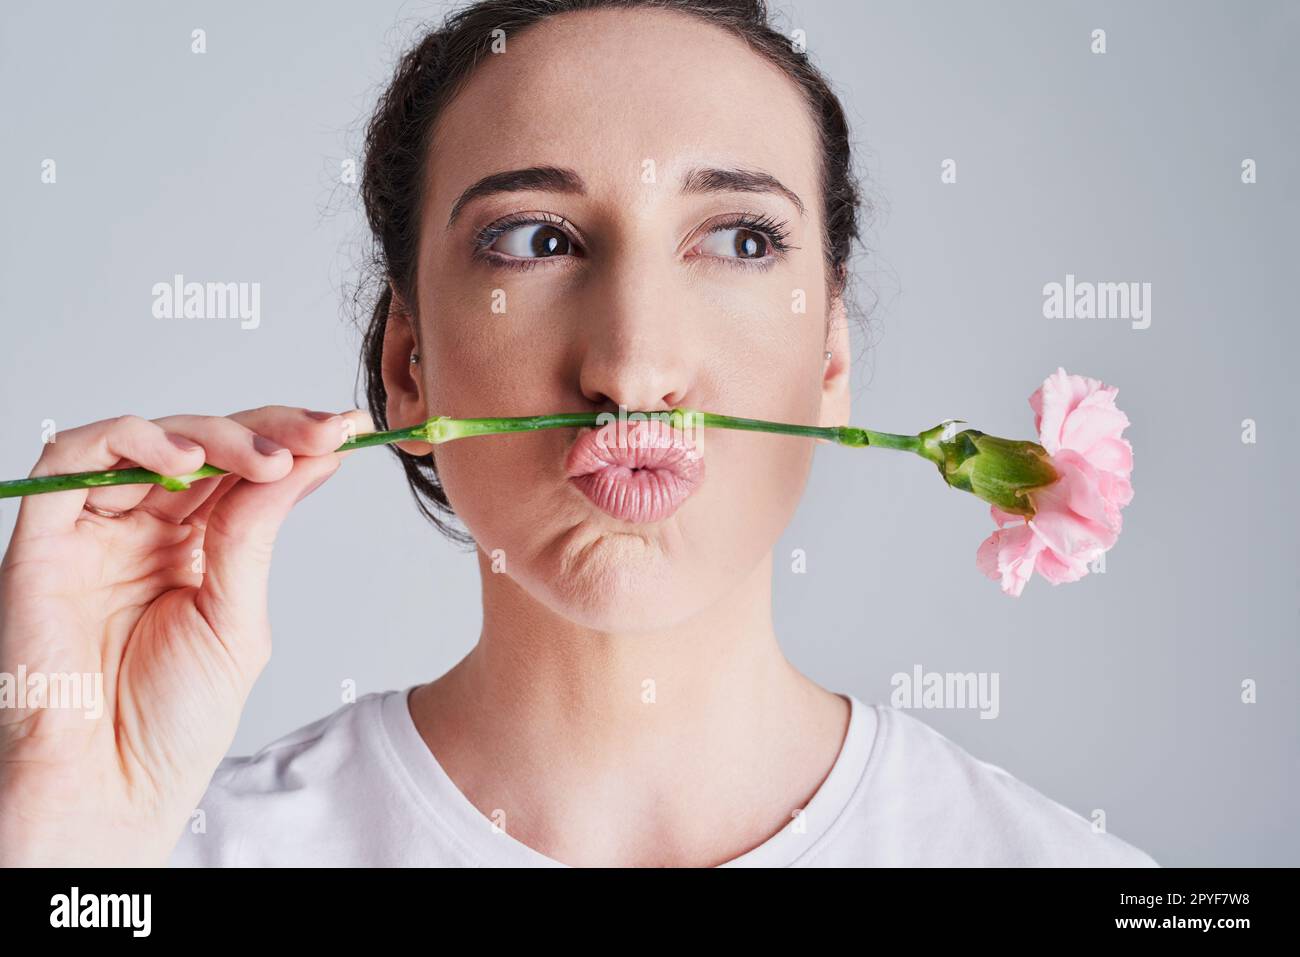 This is called a womans moustache. Studio shot of a beautiful young woman making a face with a pink flower against a grey background. Stock Photo